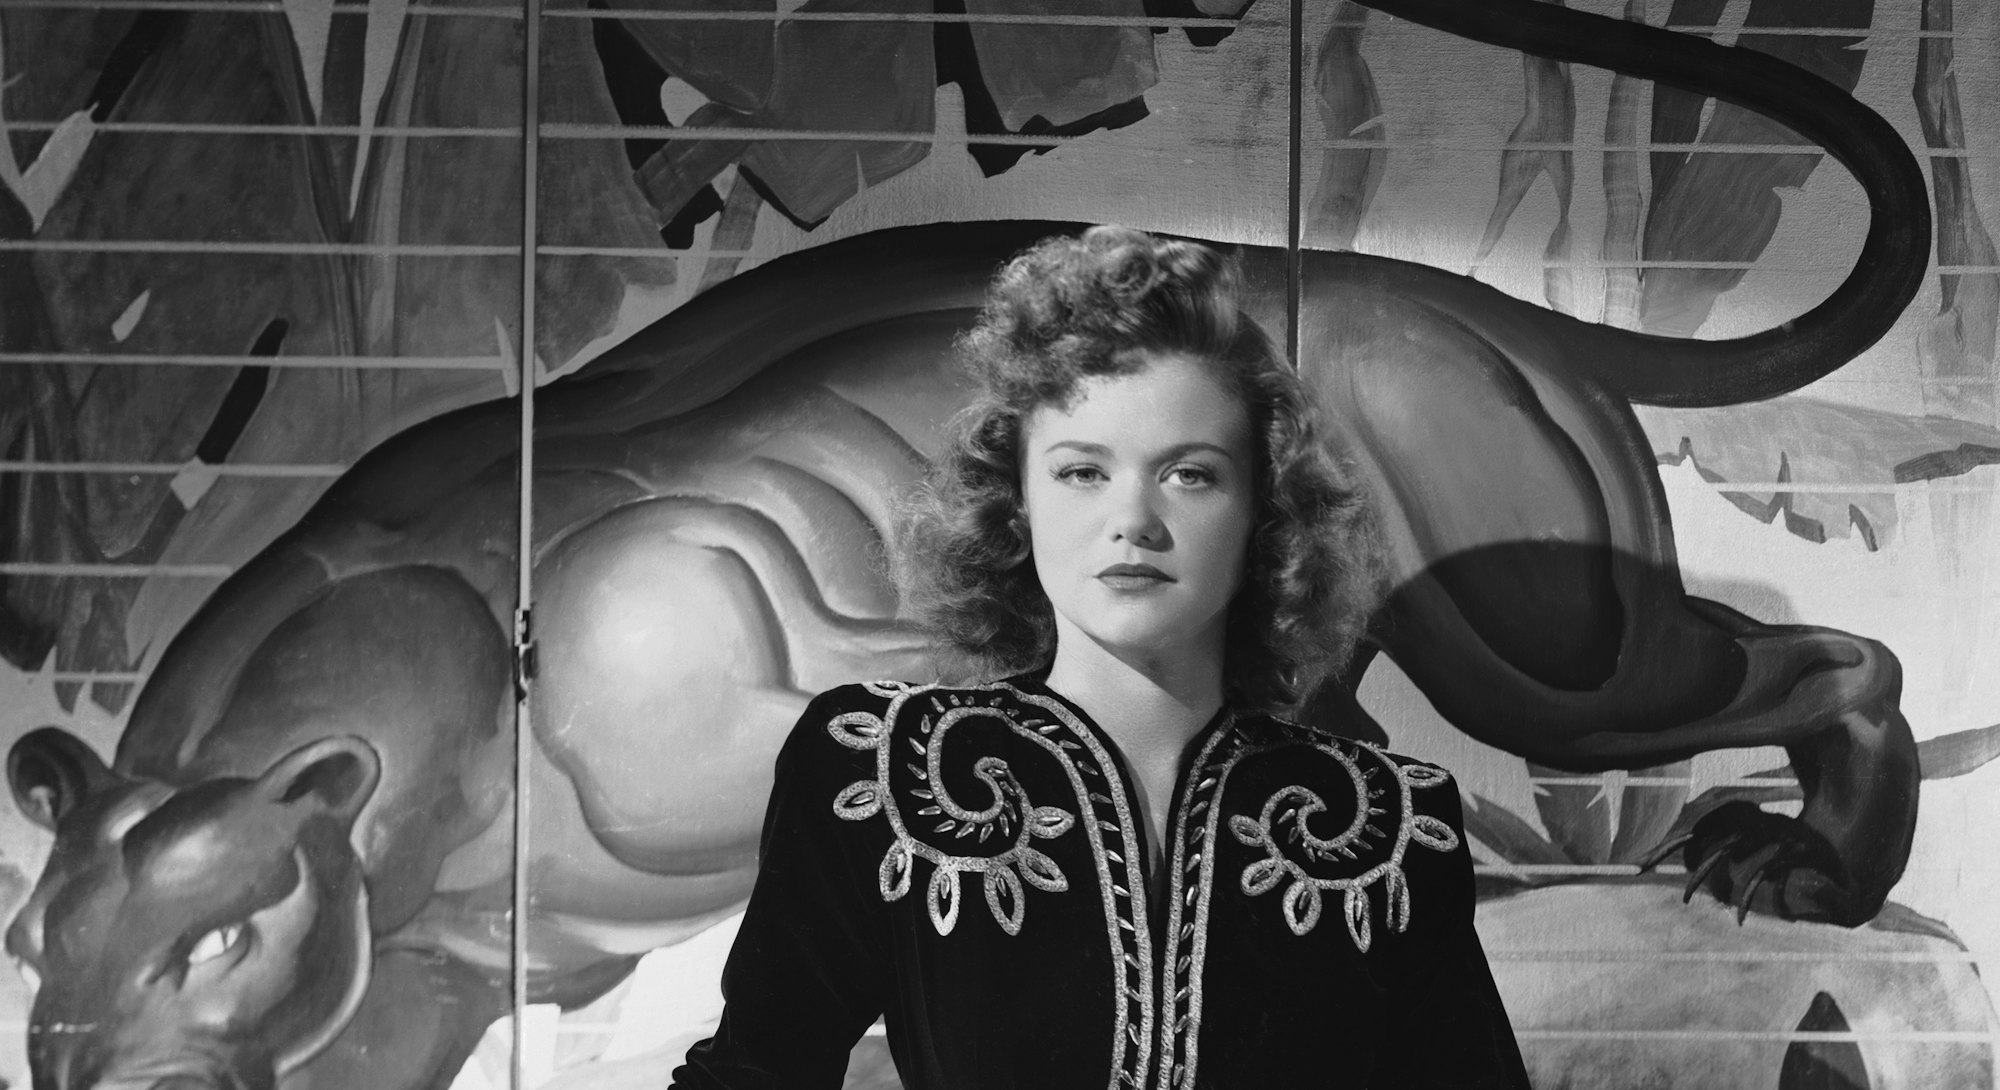 Around the time of her starring role in Jacques Tourneur's 'Cat People', French film actress Simone ...